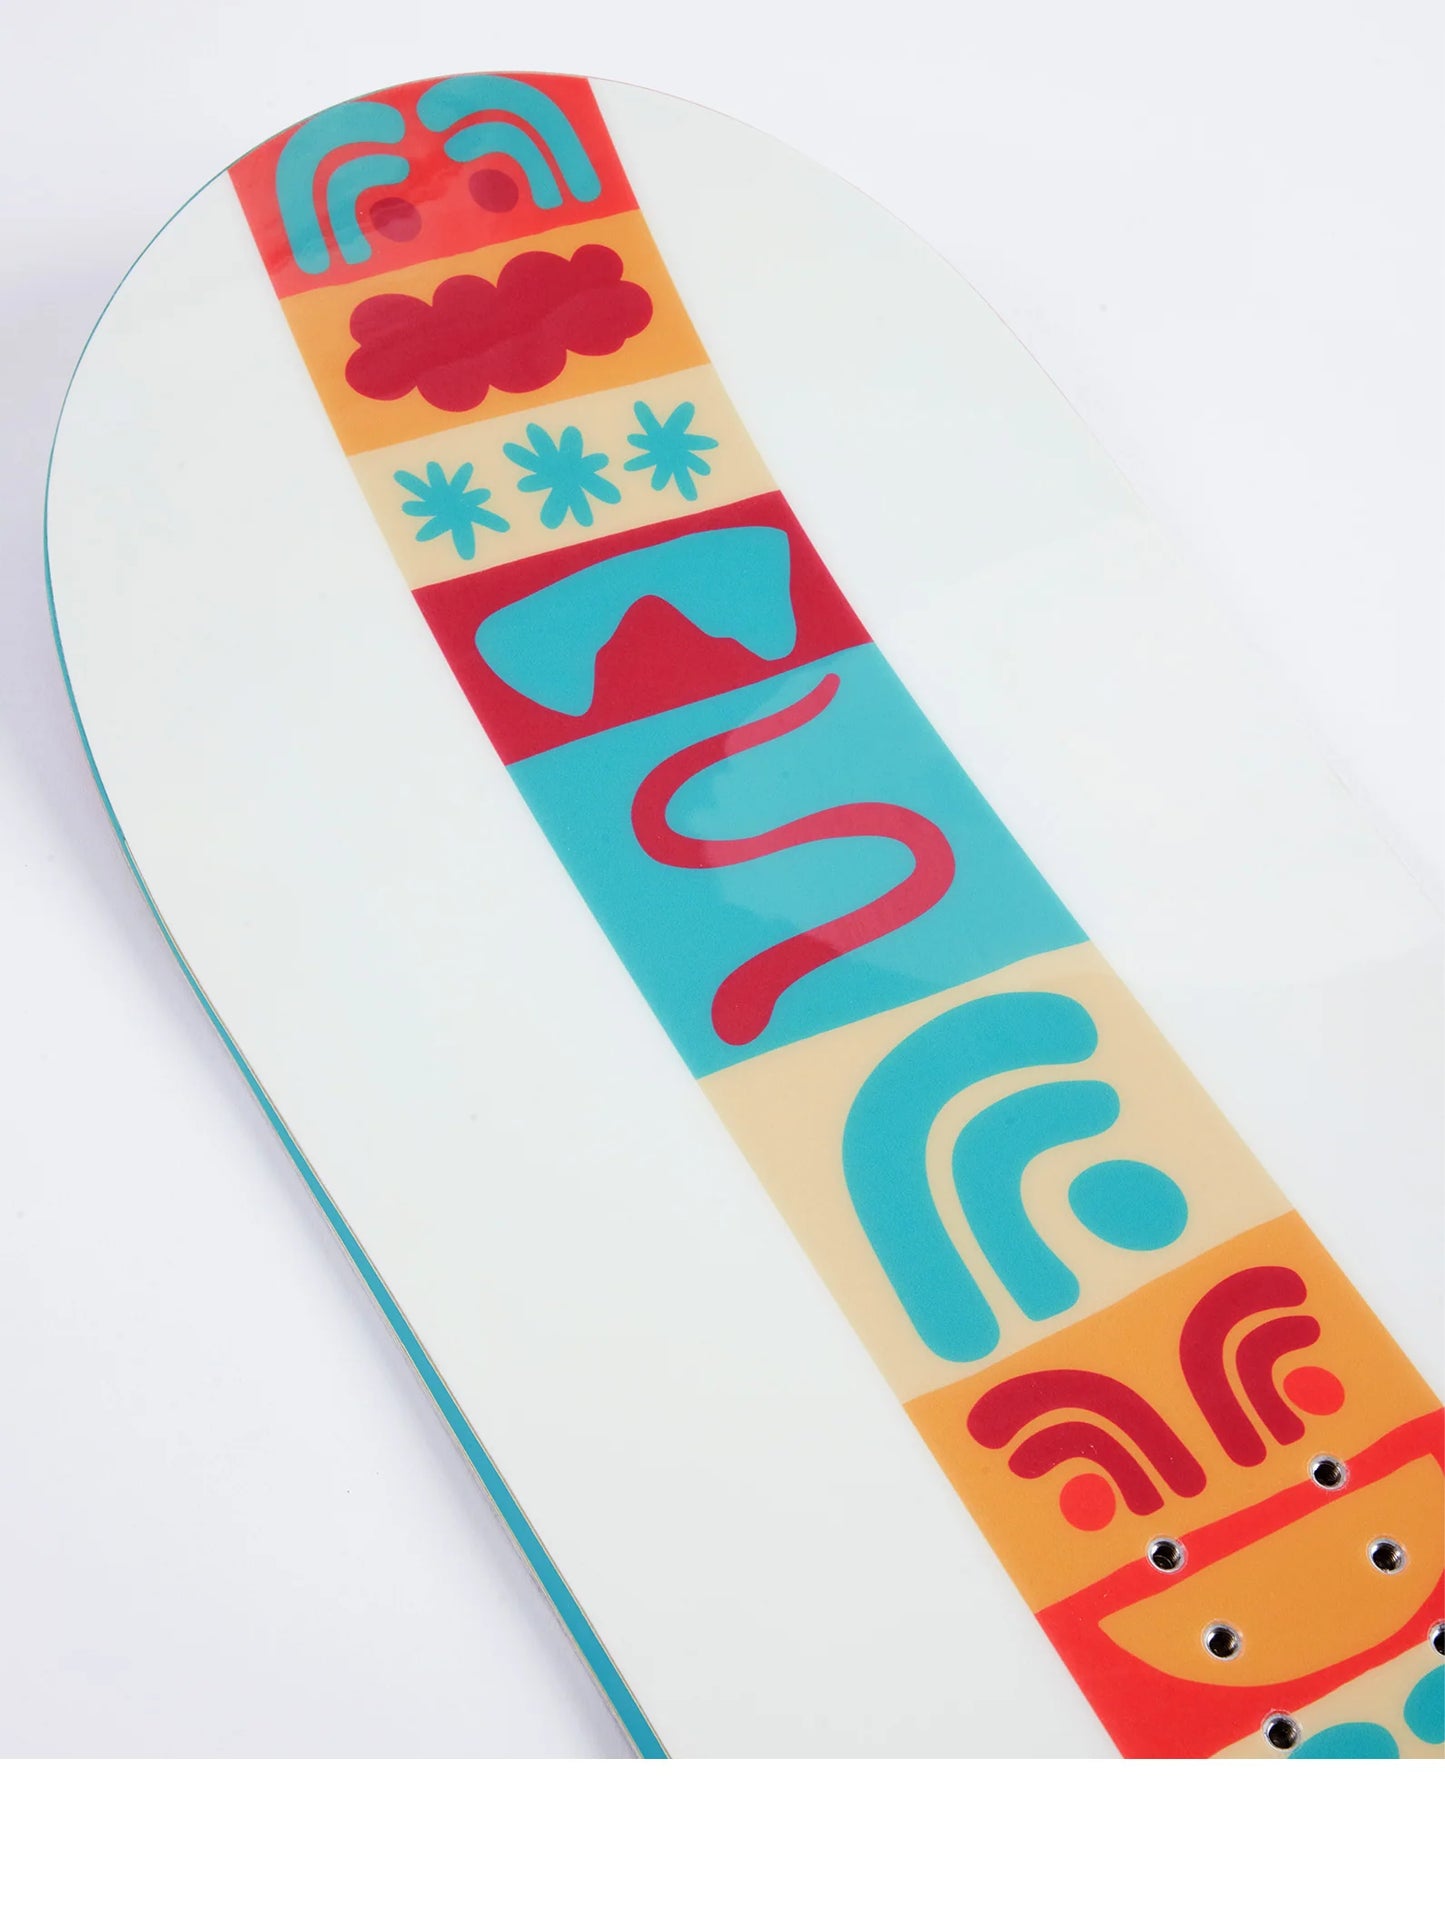 2024 Signal Snowboards - Ambient - Pink Friday